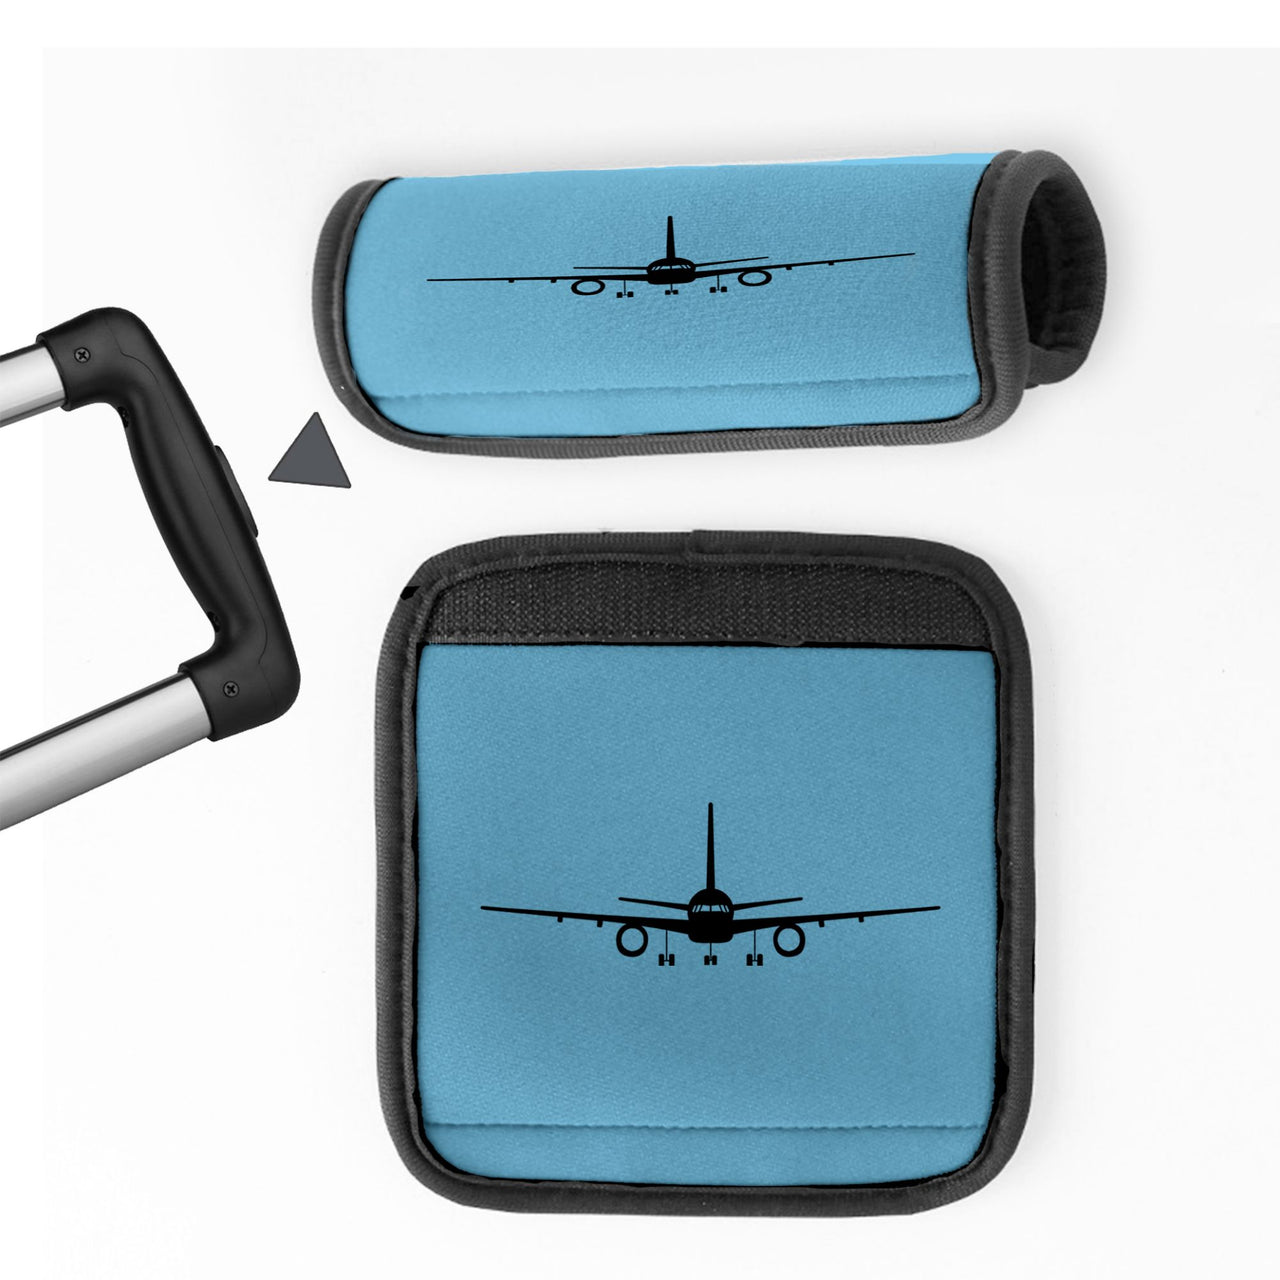 Boeing 757 Silhouette Designed Neoprene Luggage Handle Covers